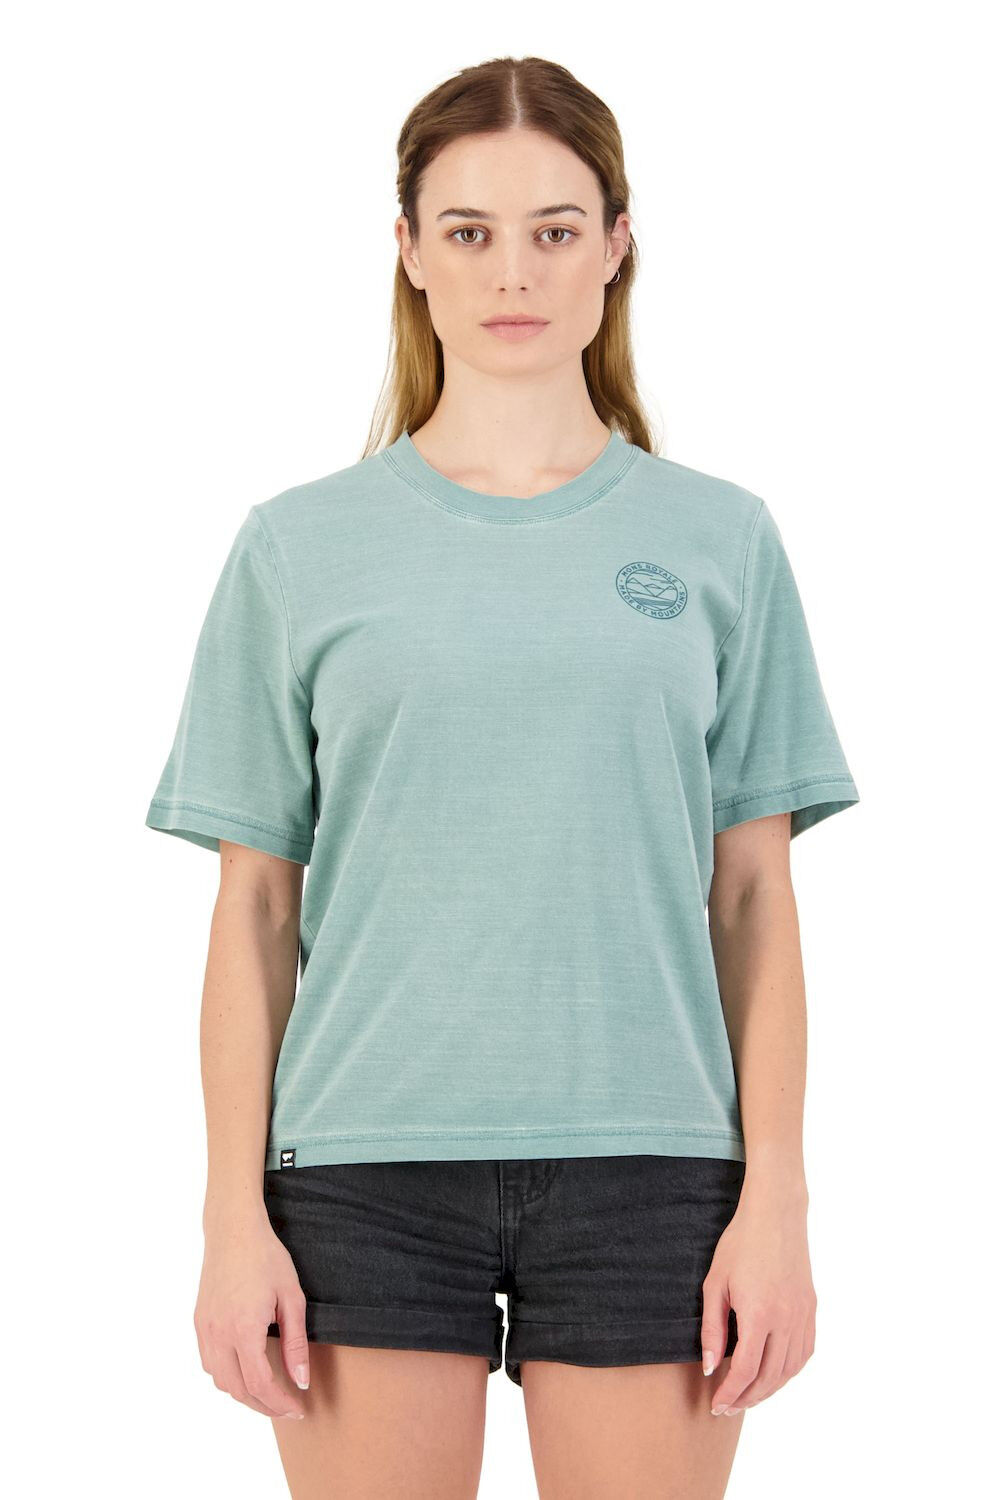 Mons Royale Icon Relaxed Tee Garment Dyed - MTB jersey - Women's